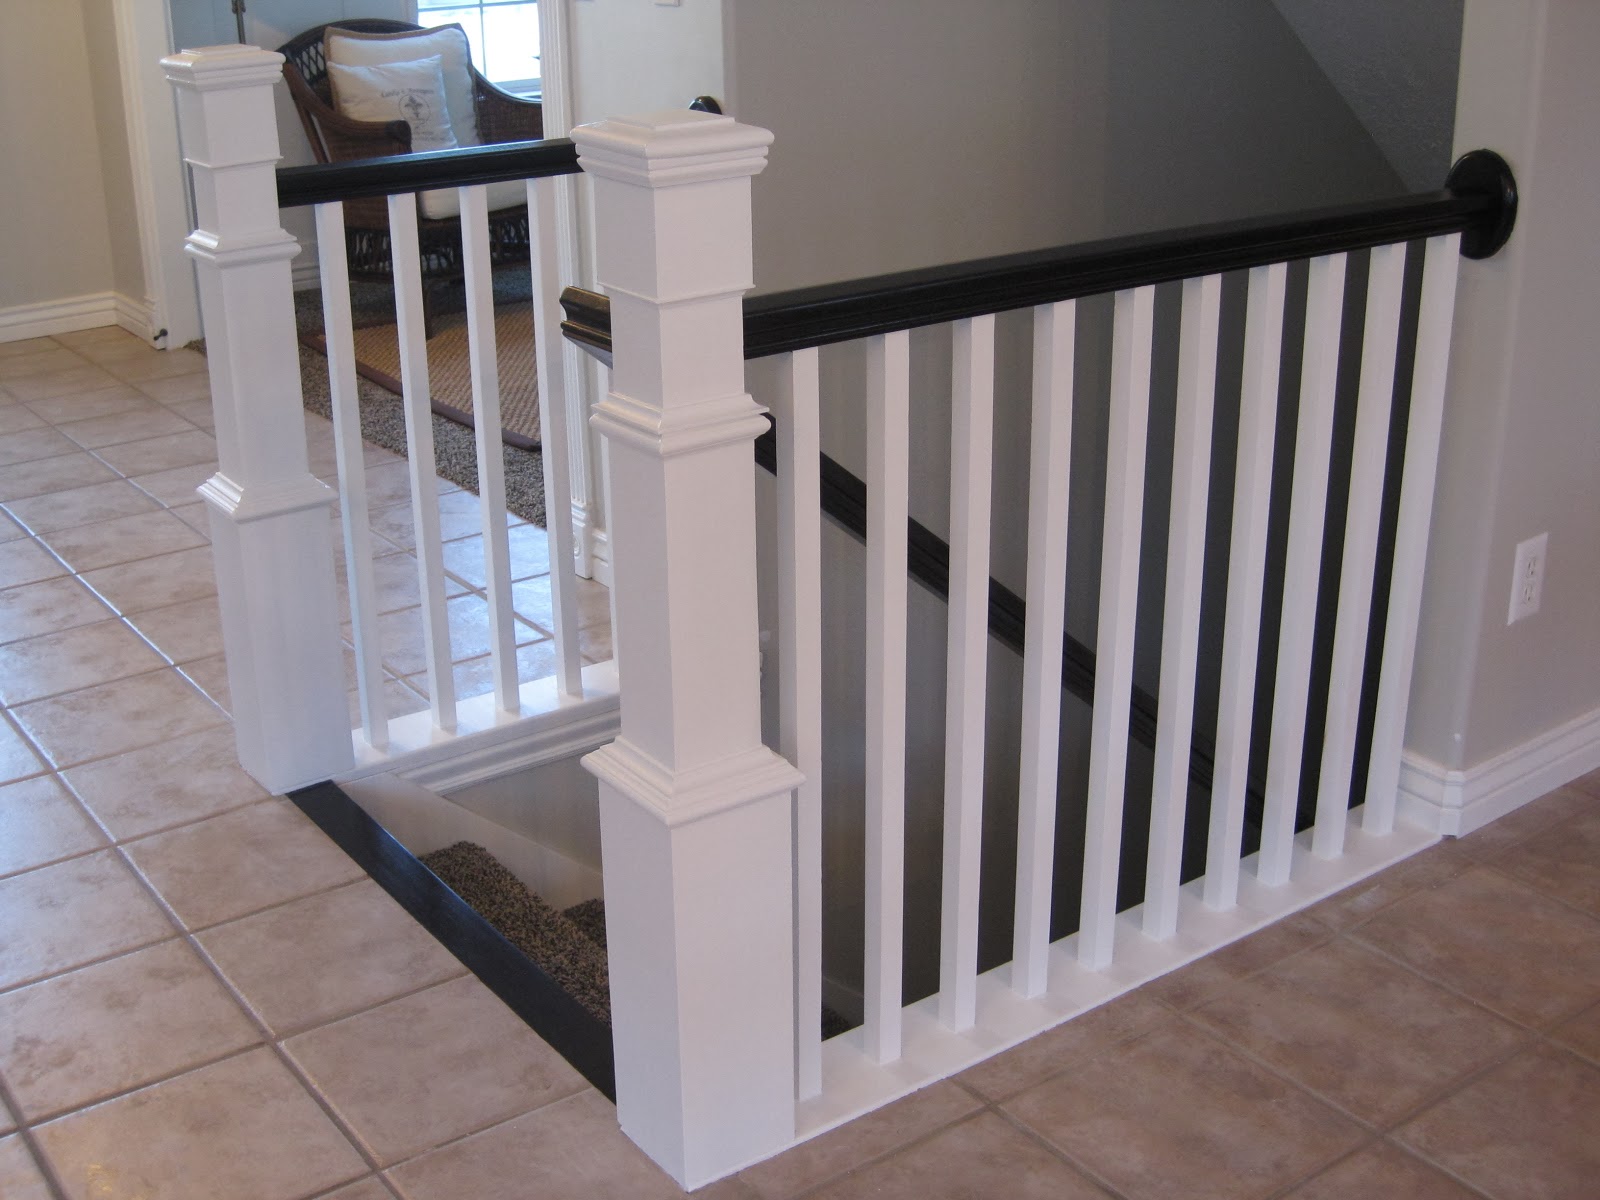 TDA decorating and design: Before & After DIY Stair Railing Makeover Reveal